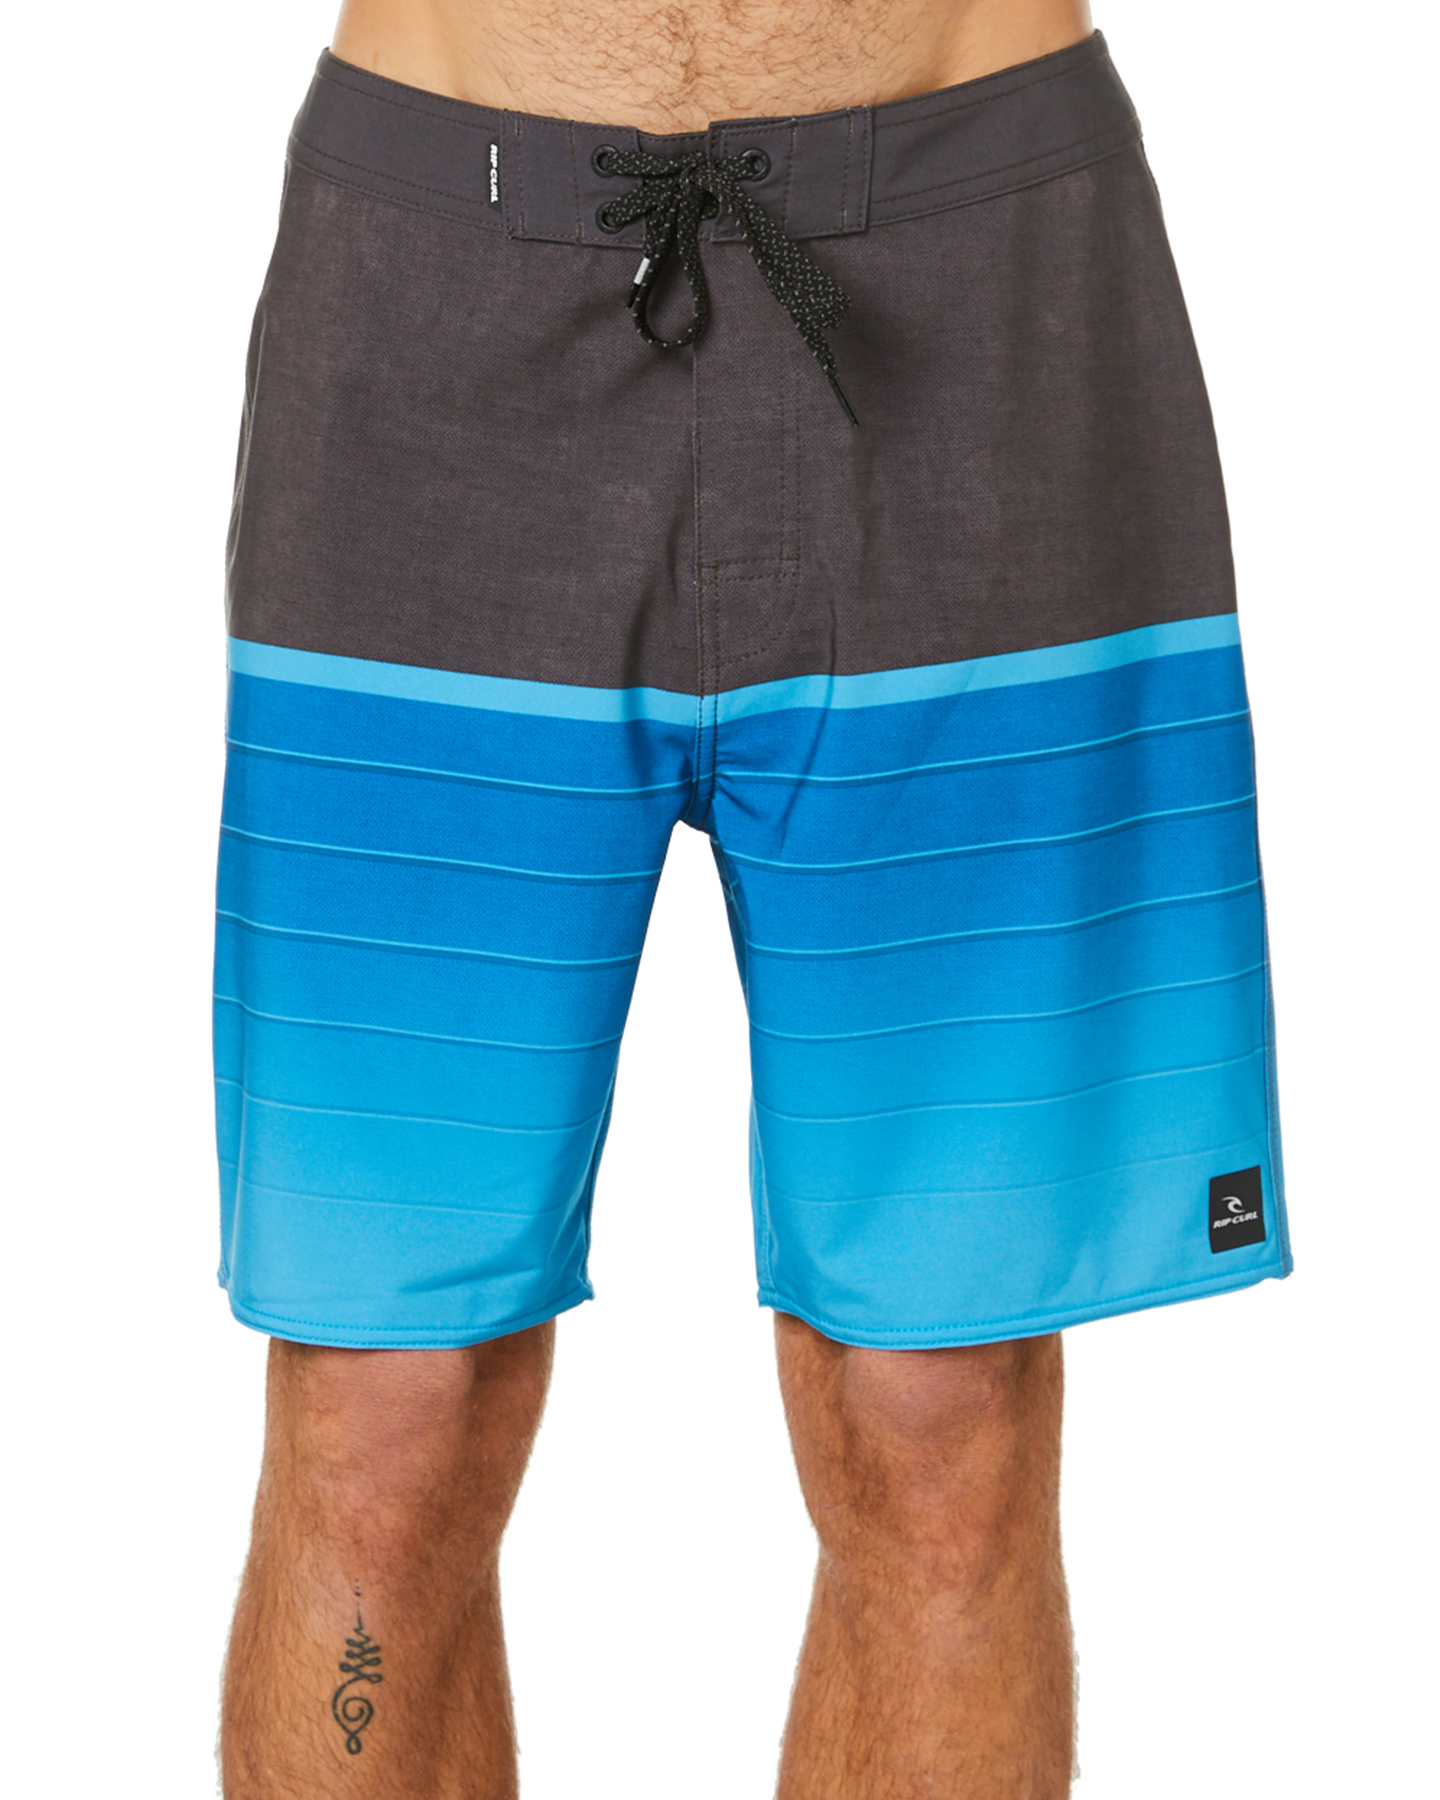 Rip Curl Mirage Combined 2.0 Mens Boardshort - Blue | SurfStitch